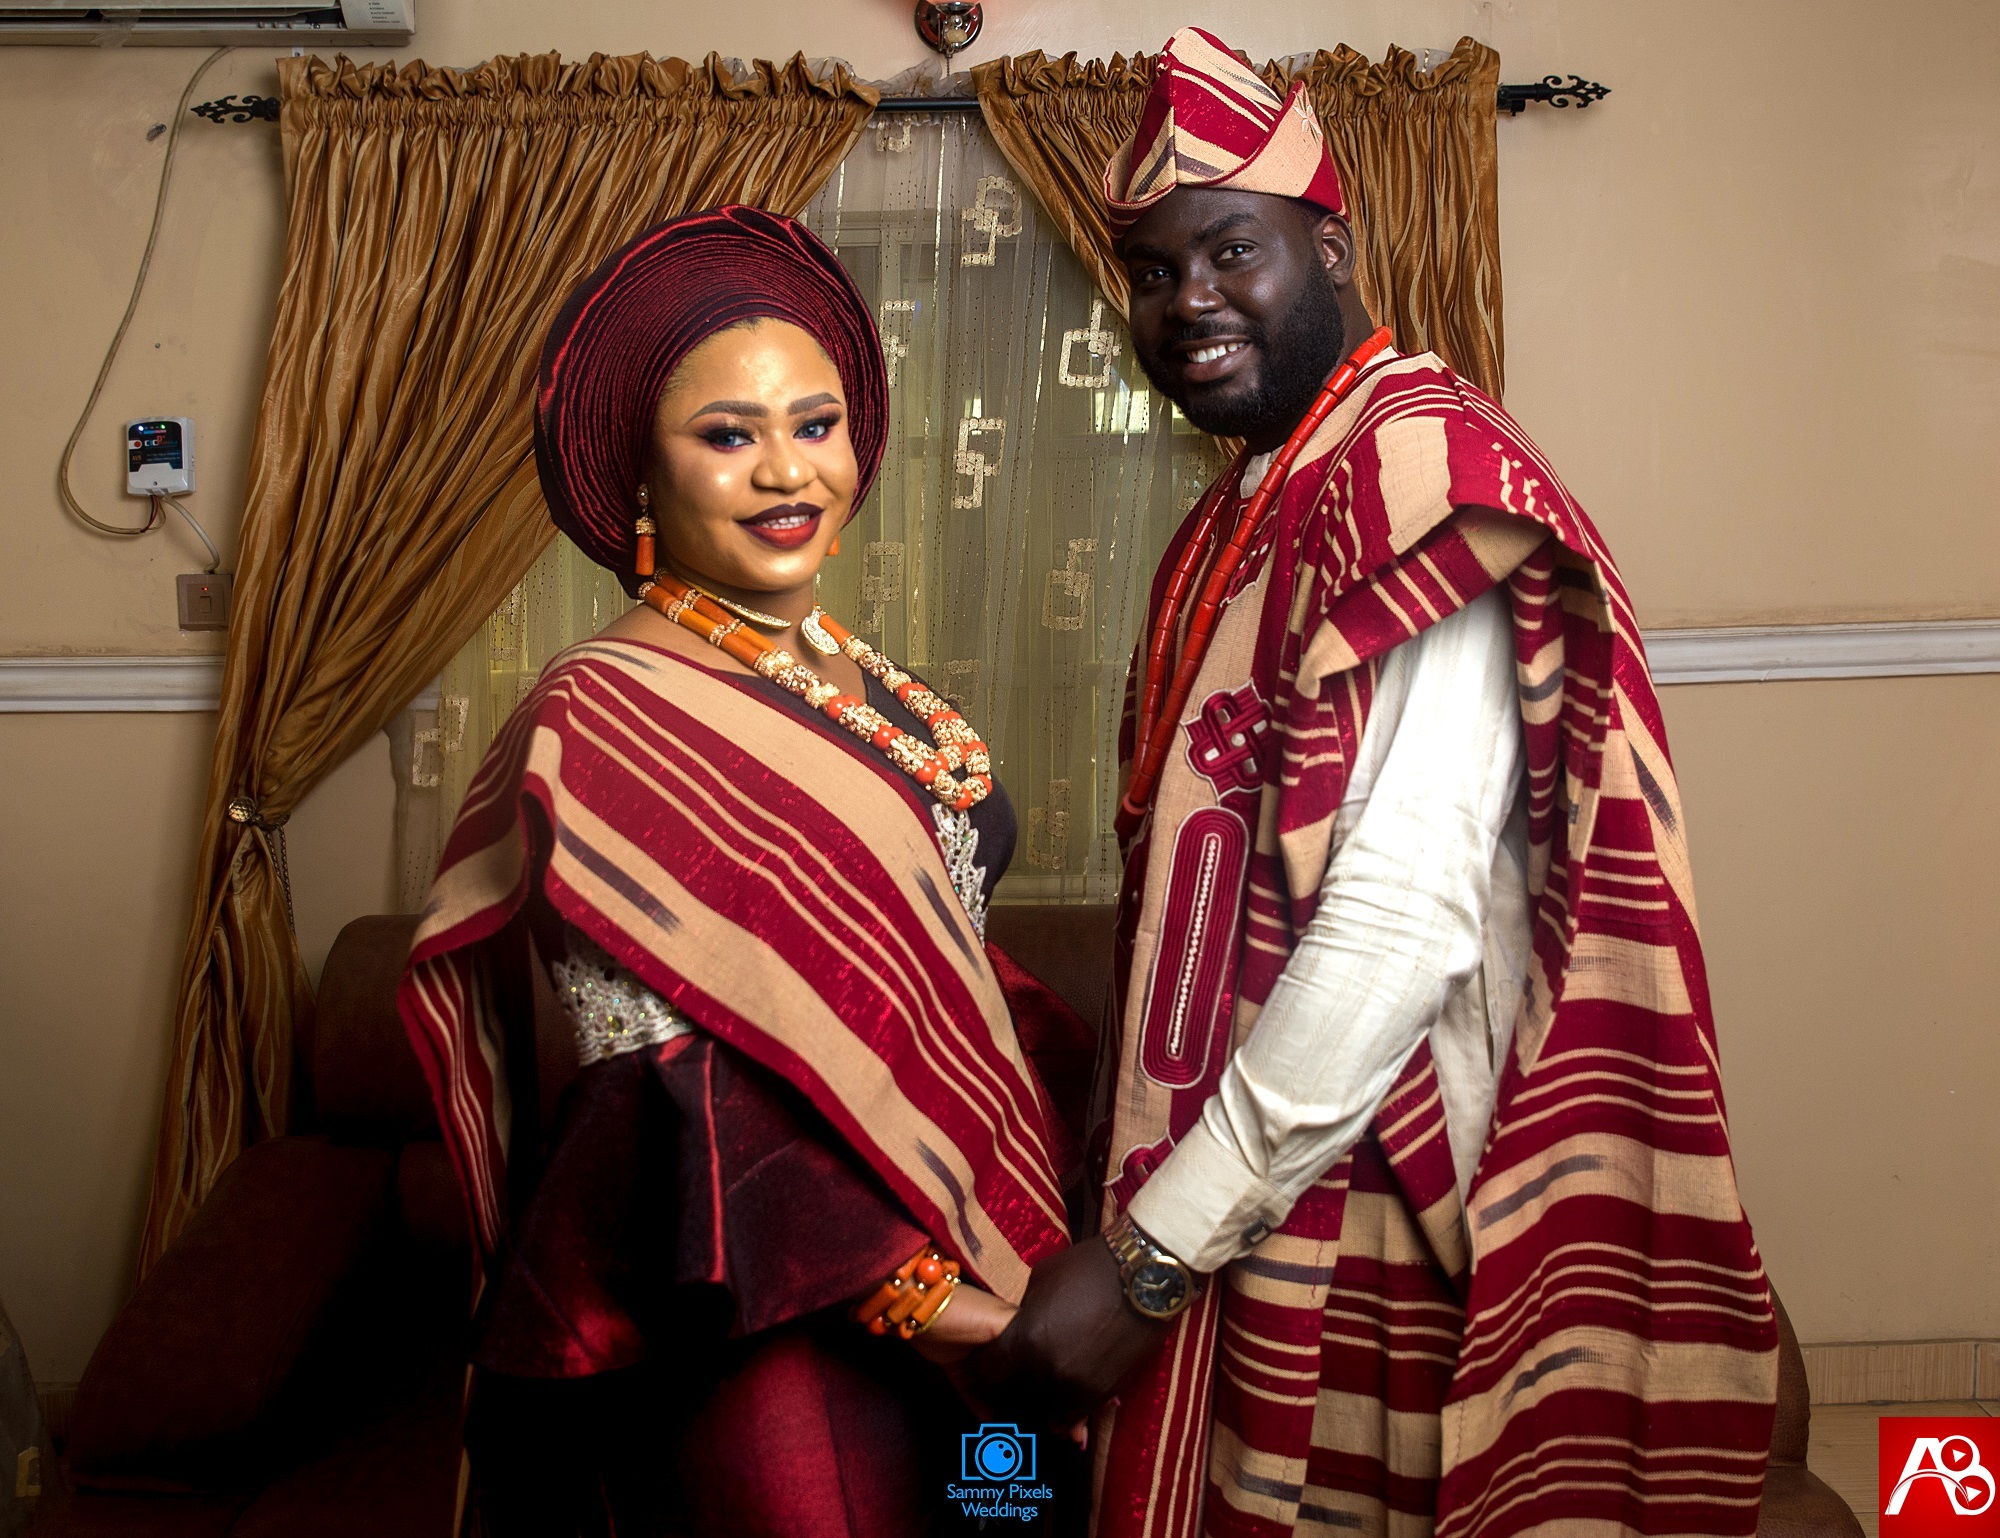 Check out Deyshawlah’s stunning wedding pictures